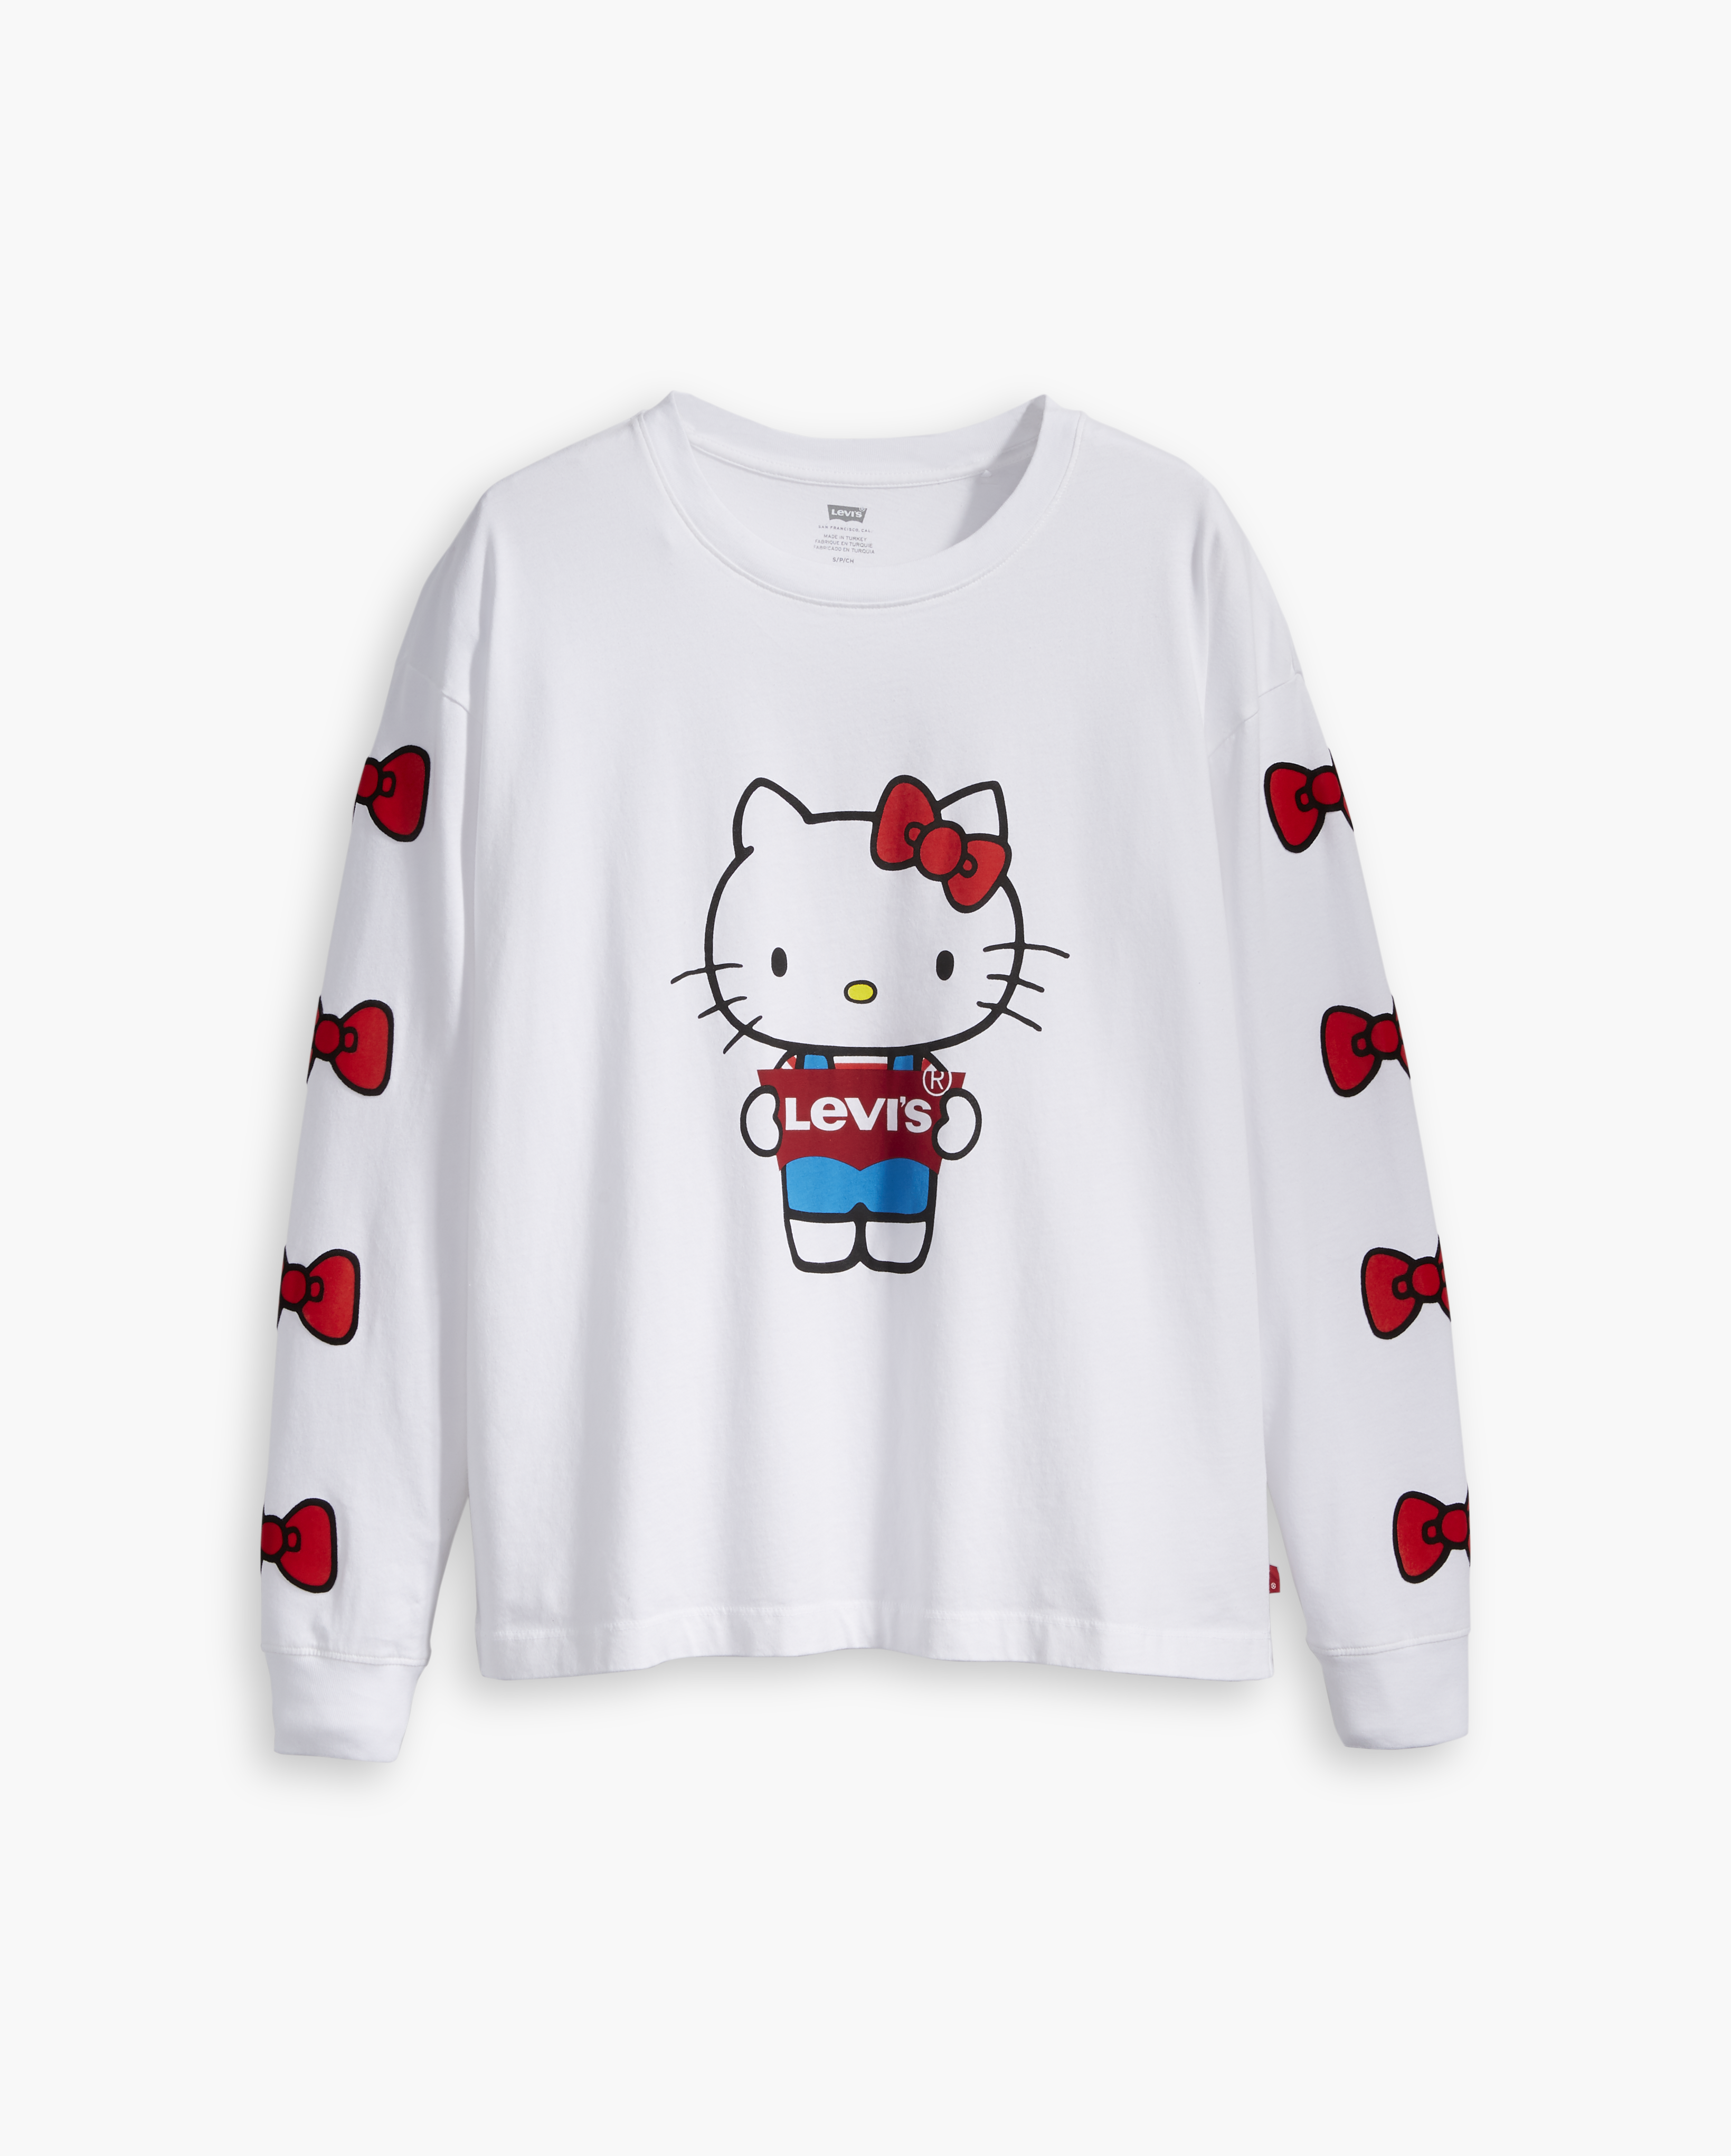 Levi's Hello kitty levis overall, Grailed